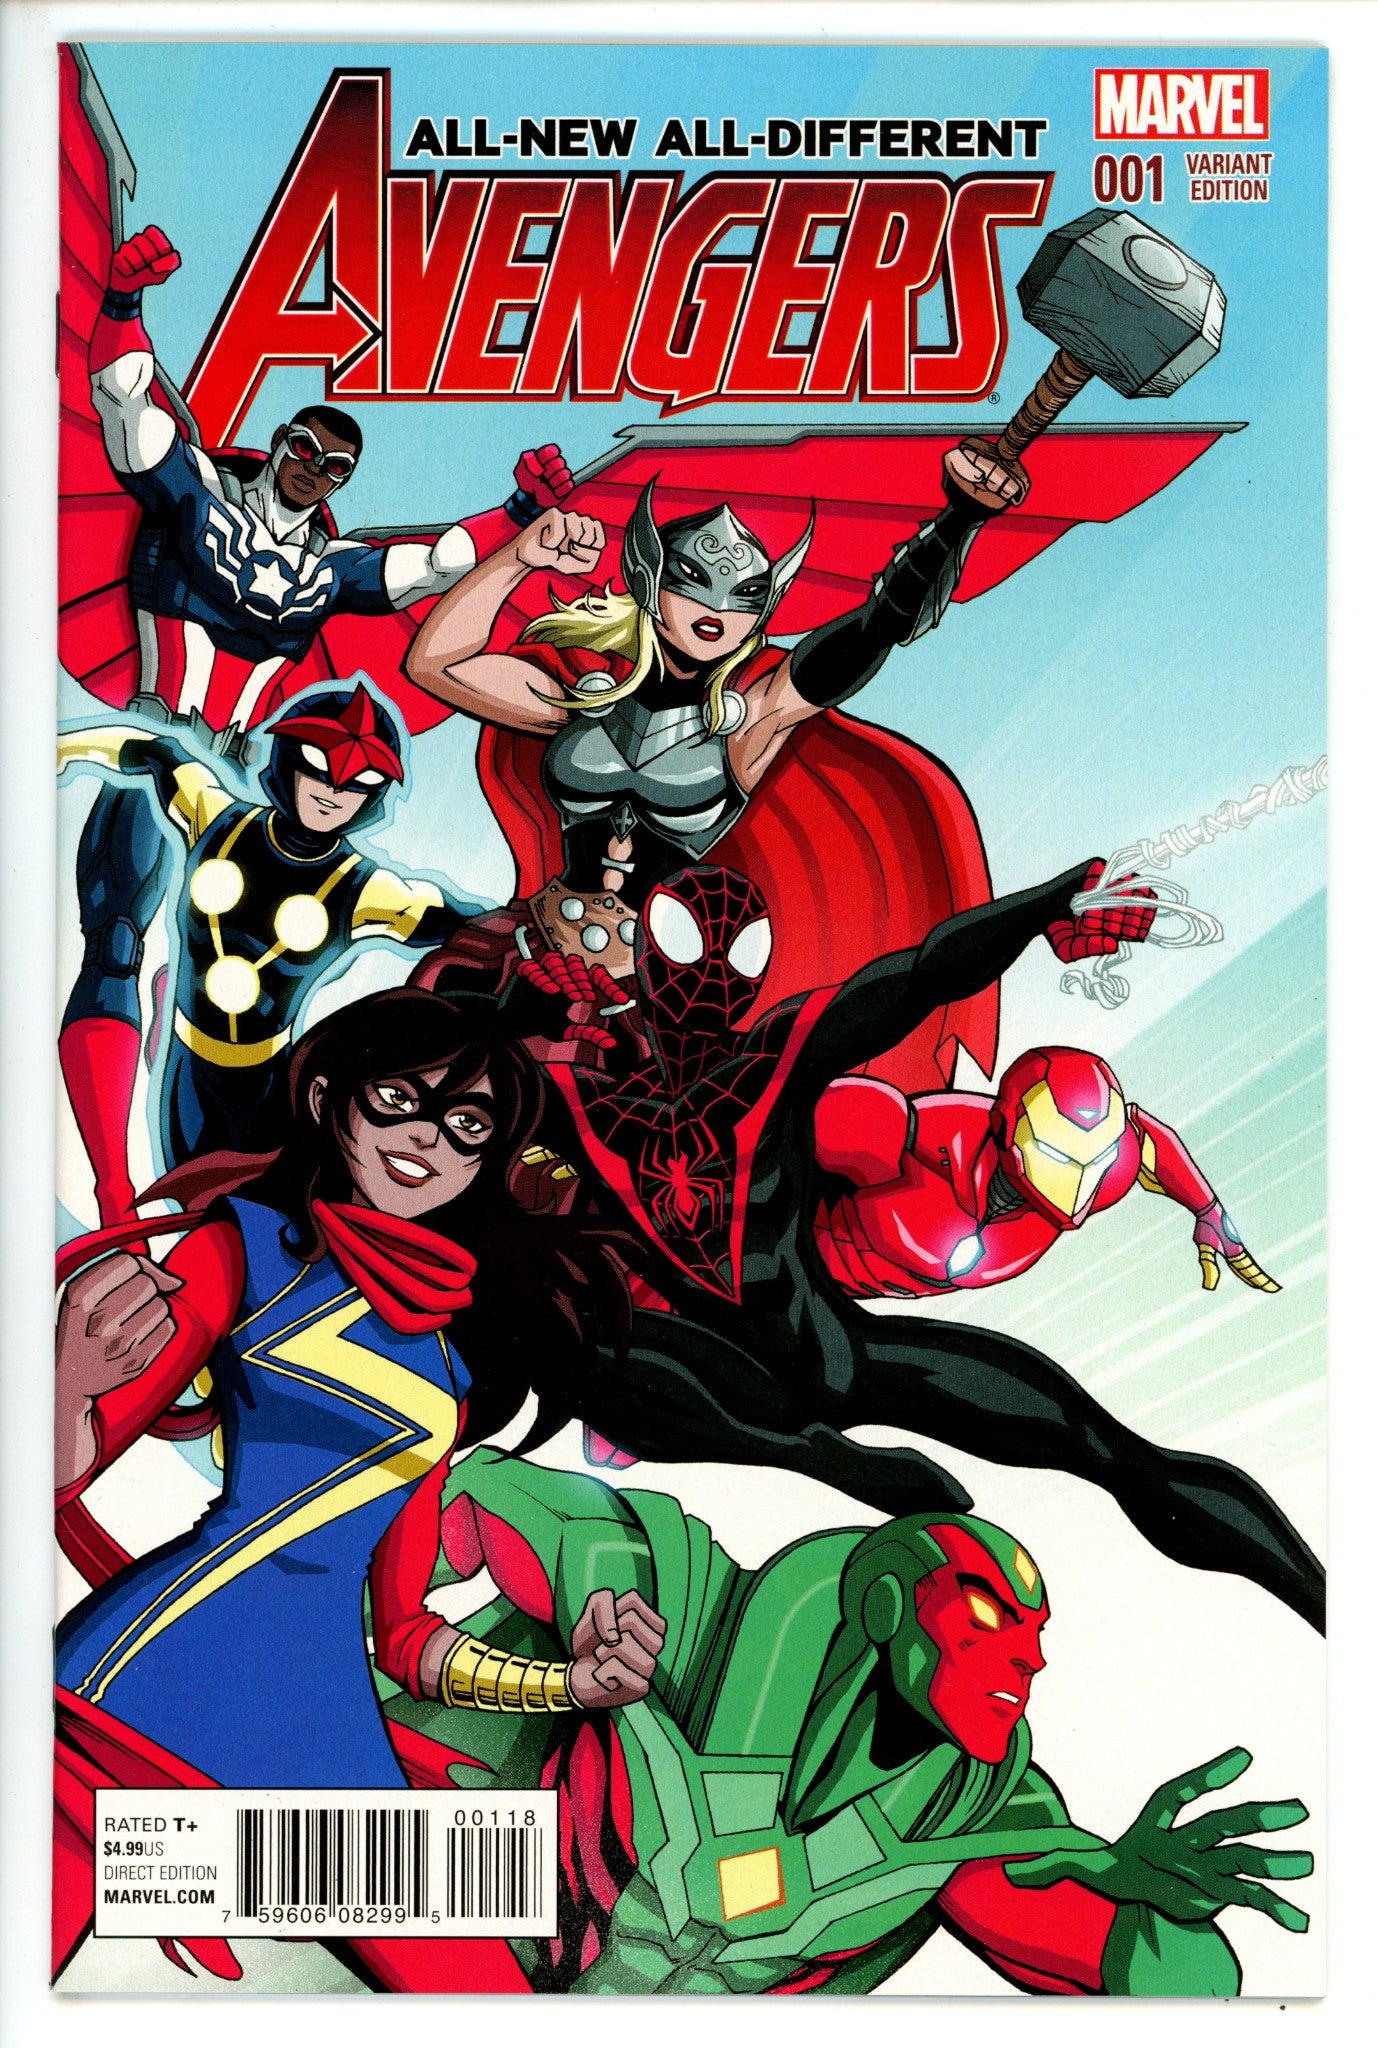 All-New, All-Different Avengers Vol 1 1 Vecchio Variant